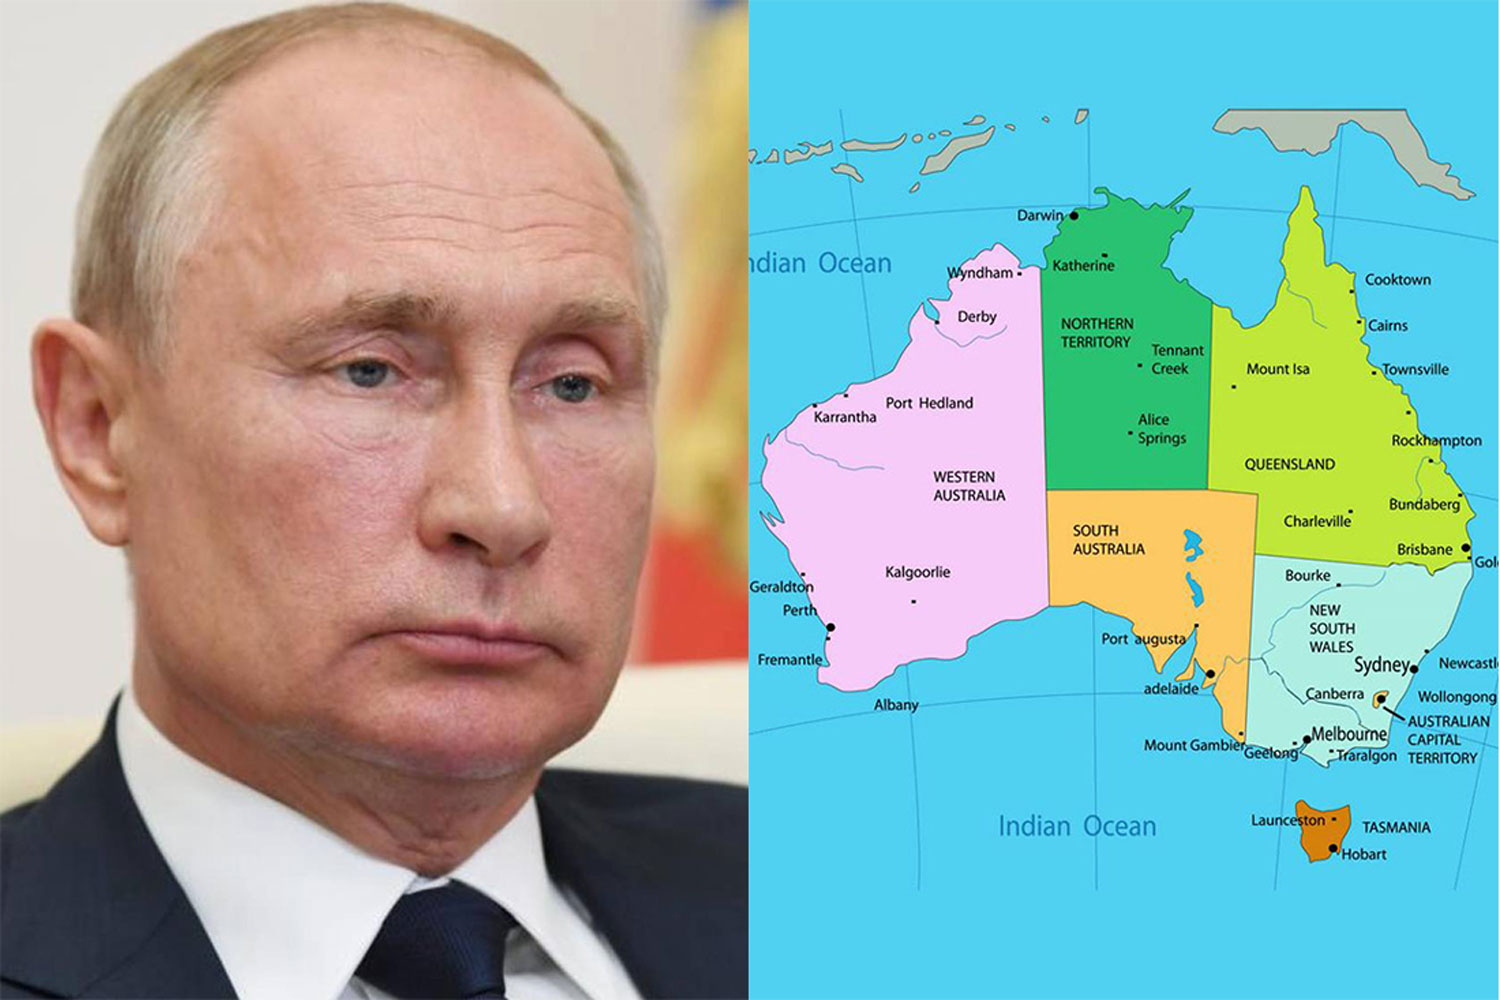 Australia Is Now On Russia’s List Of ‘Unfriendly’ Countries